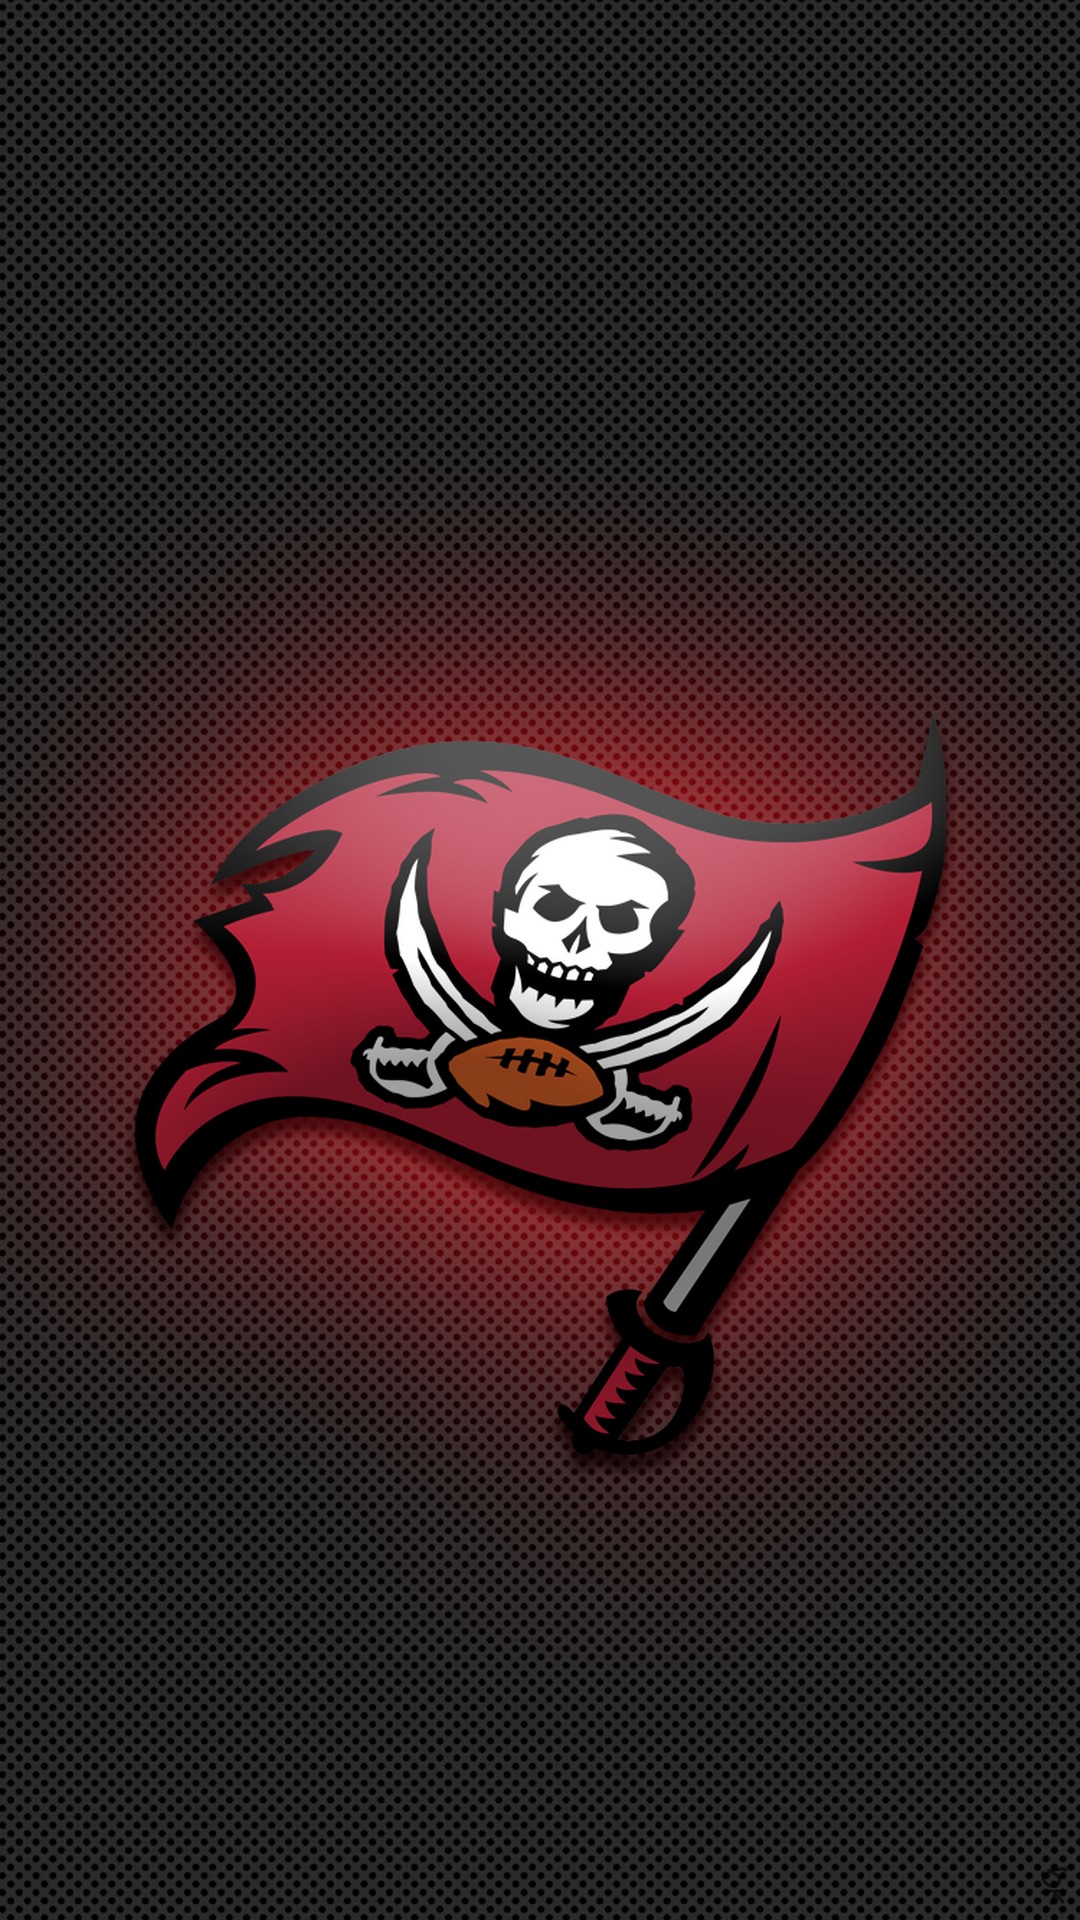 Tampa Bay Buccaneers Wallpaper For Mobile With high-resolution 1080X1920 pixel. You can use this wallpaper for your Mac or Windows Desktop Background, iPhone, Android or Tablet and another Smartphone device